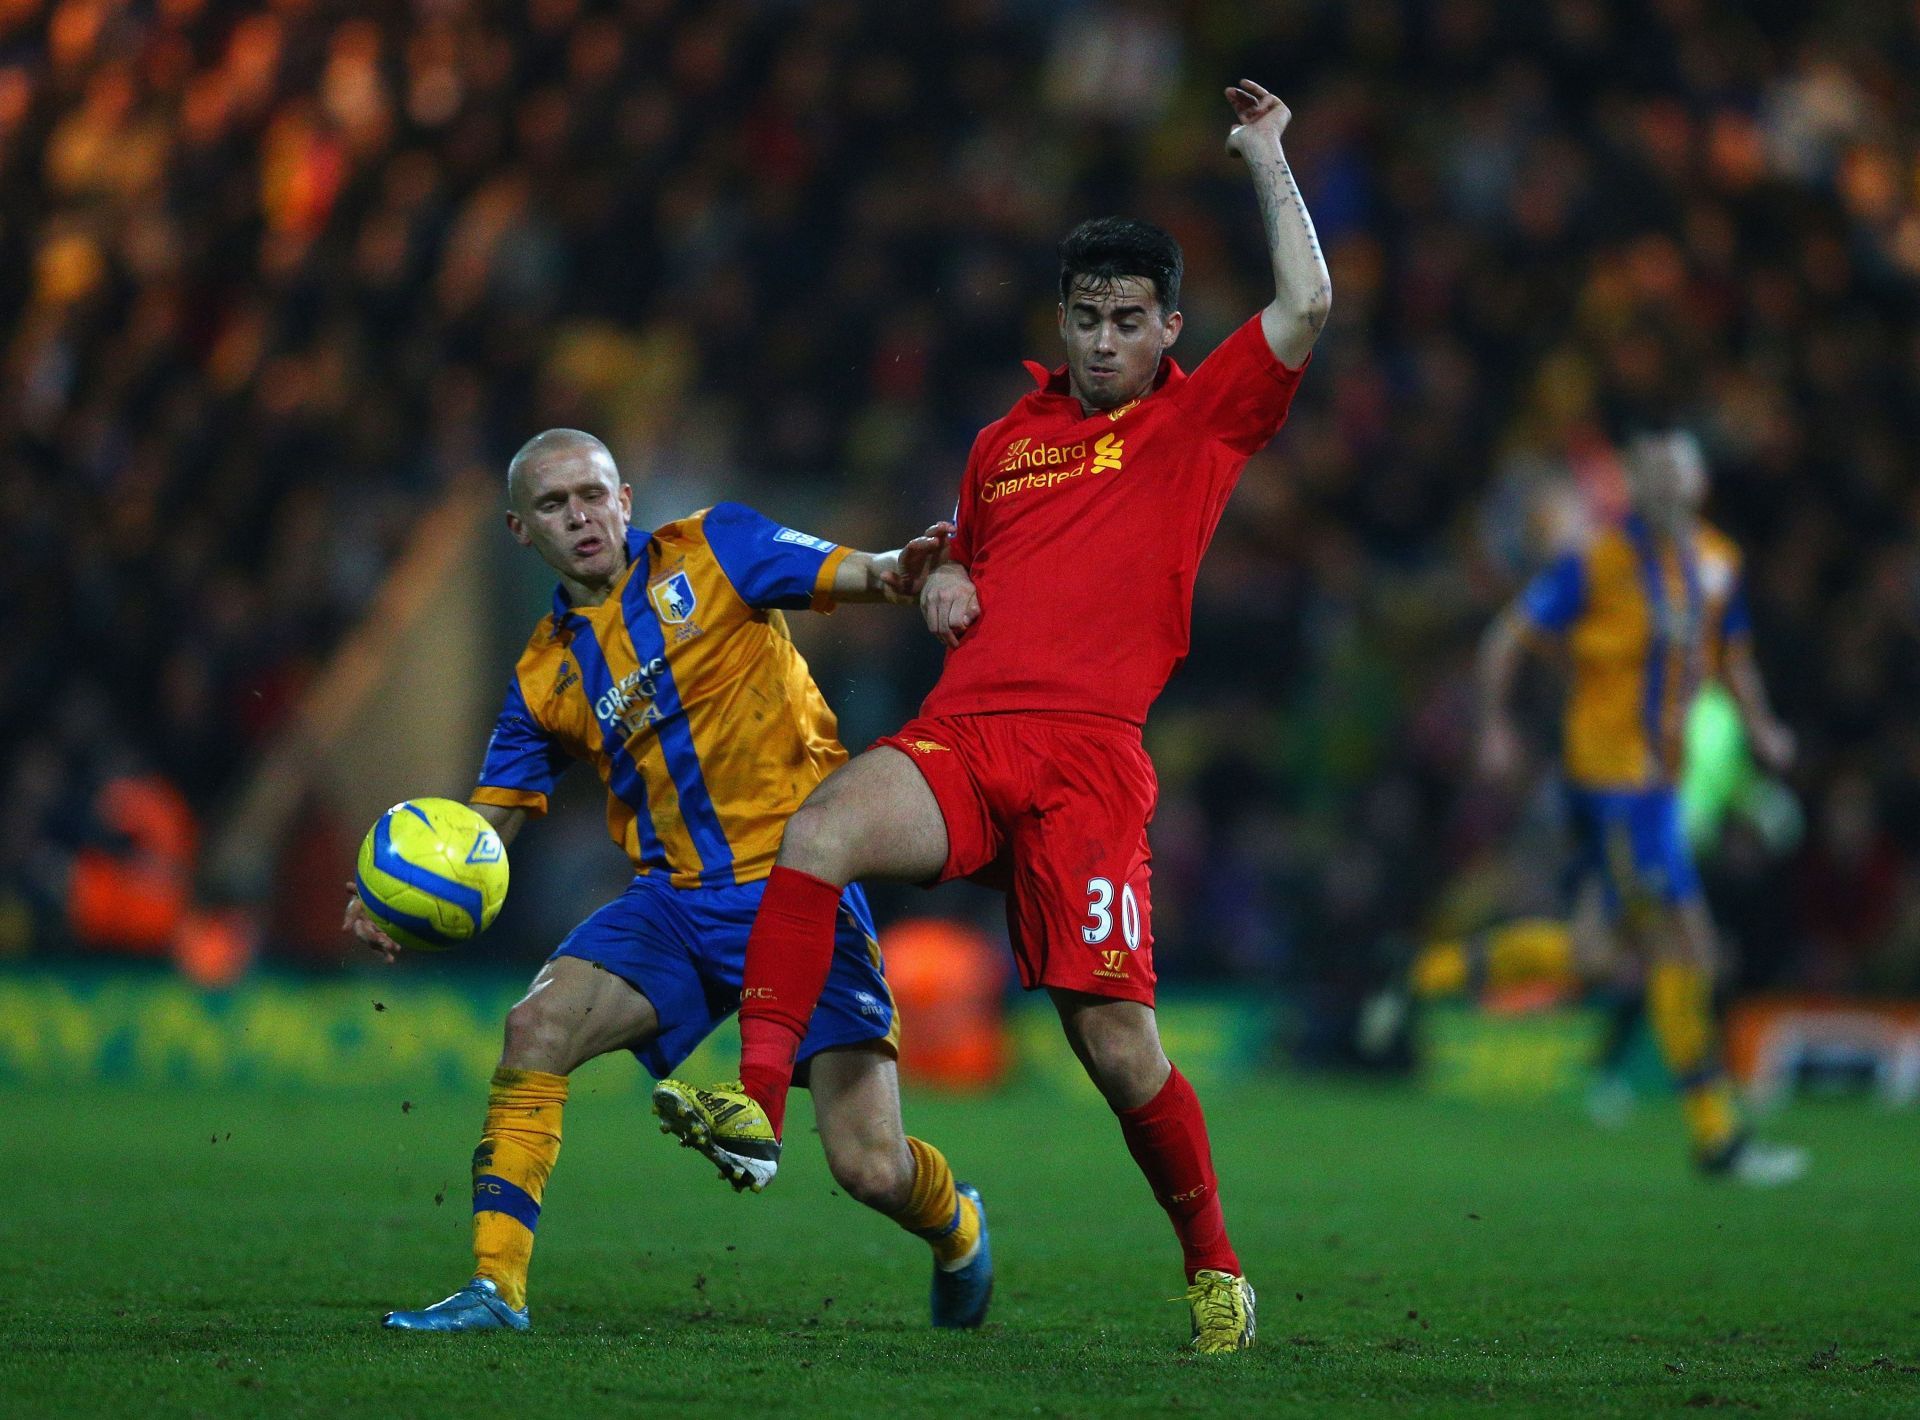 Suso struggled to impress at Anfield